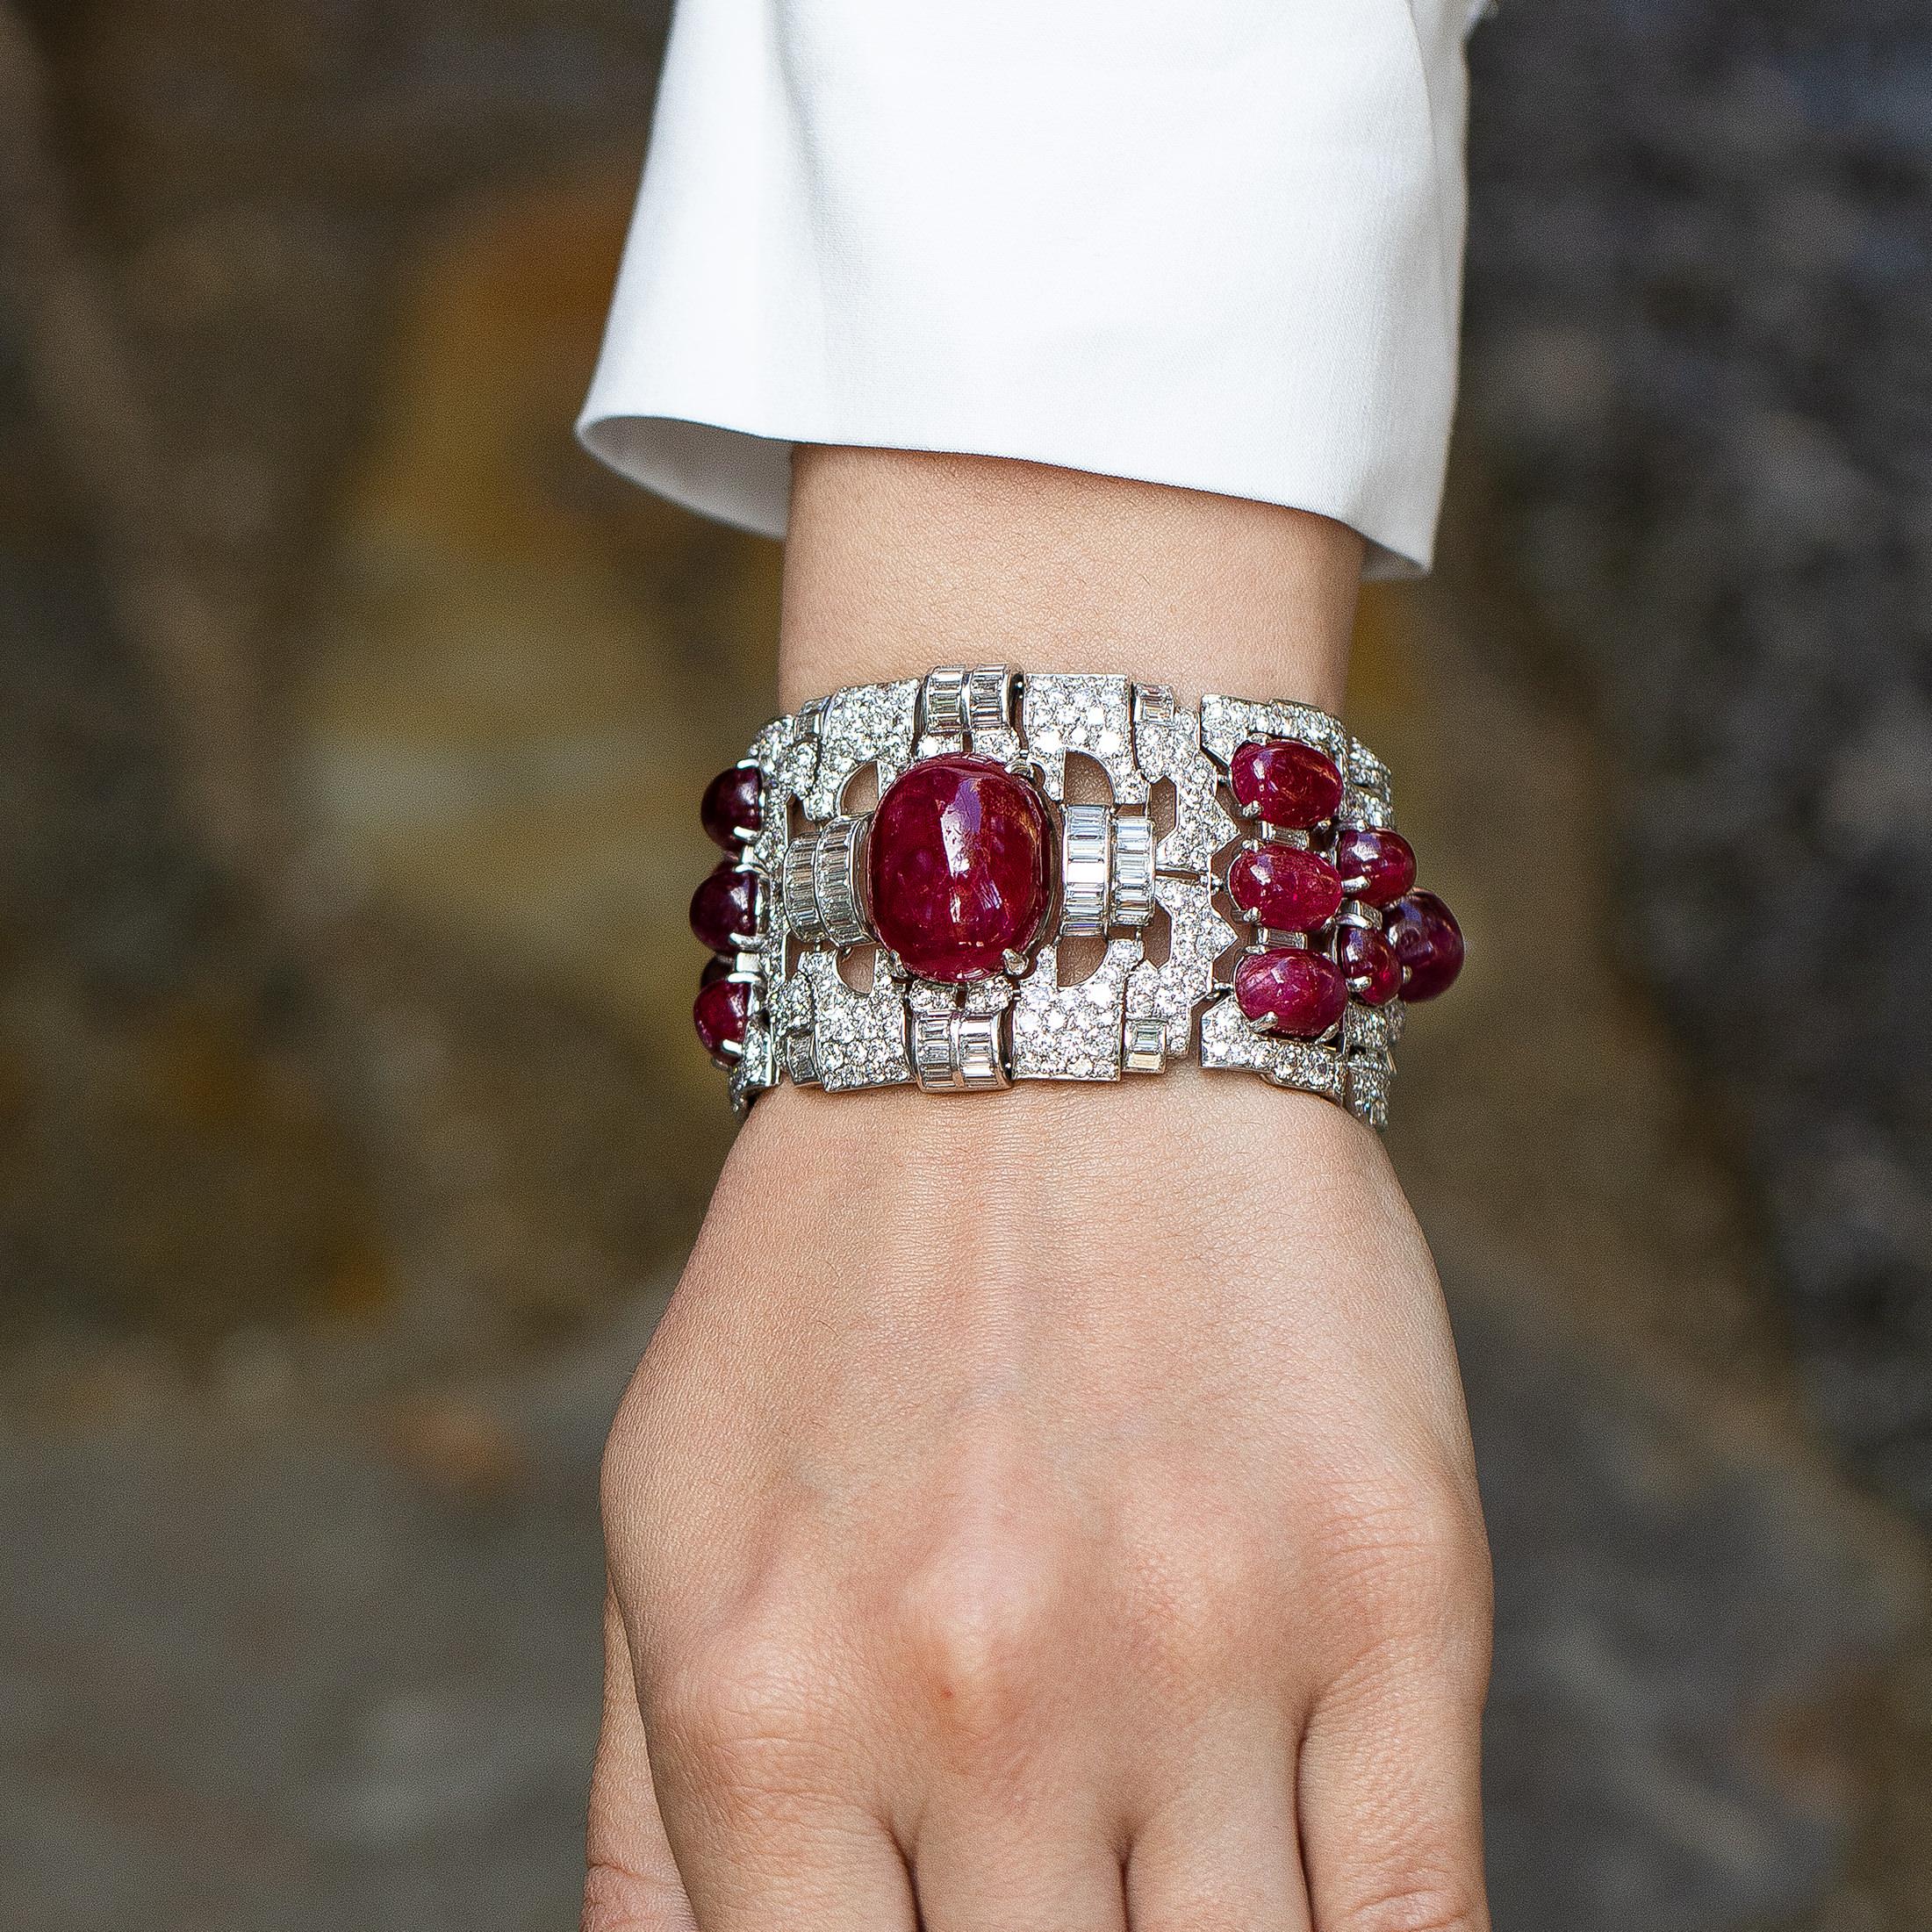 Very Important Ruby & Diamond Bracelet.
Cabochon Rubies = 60+ carats
Diamonds = 38.65 carats
( Color: F, Clarity: VS )
Metal: Platinum
Period: Art Deco
Length = 7 Inches
Jewelry Gift Box Included